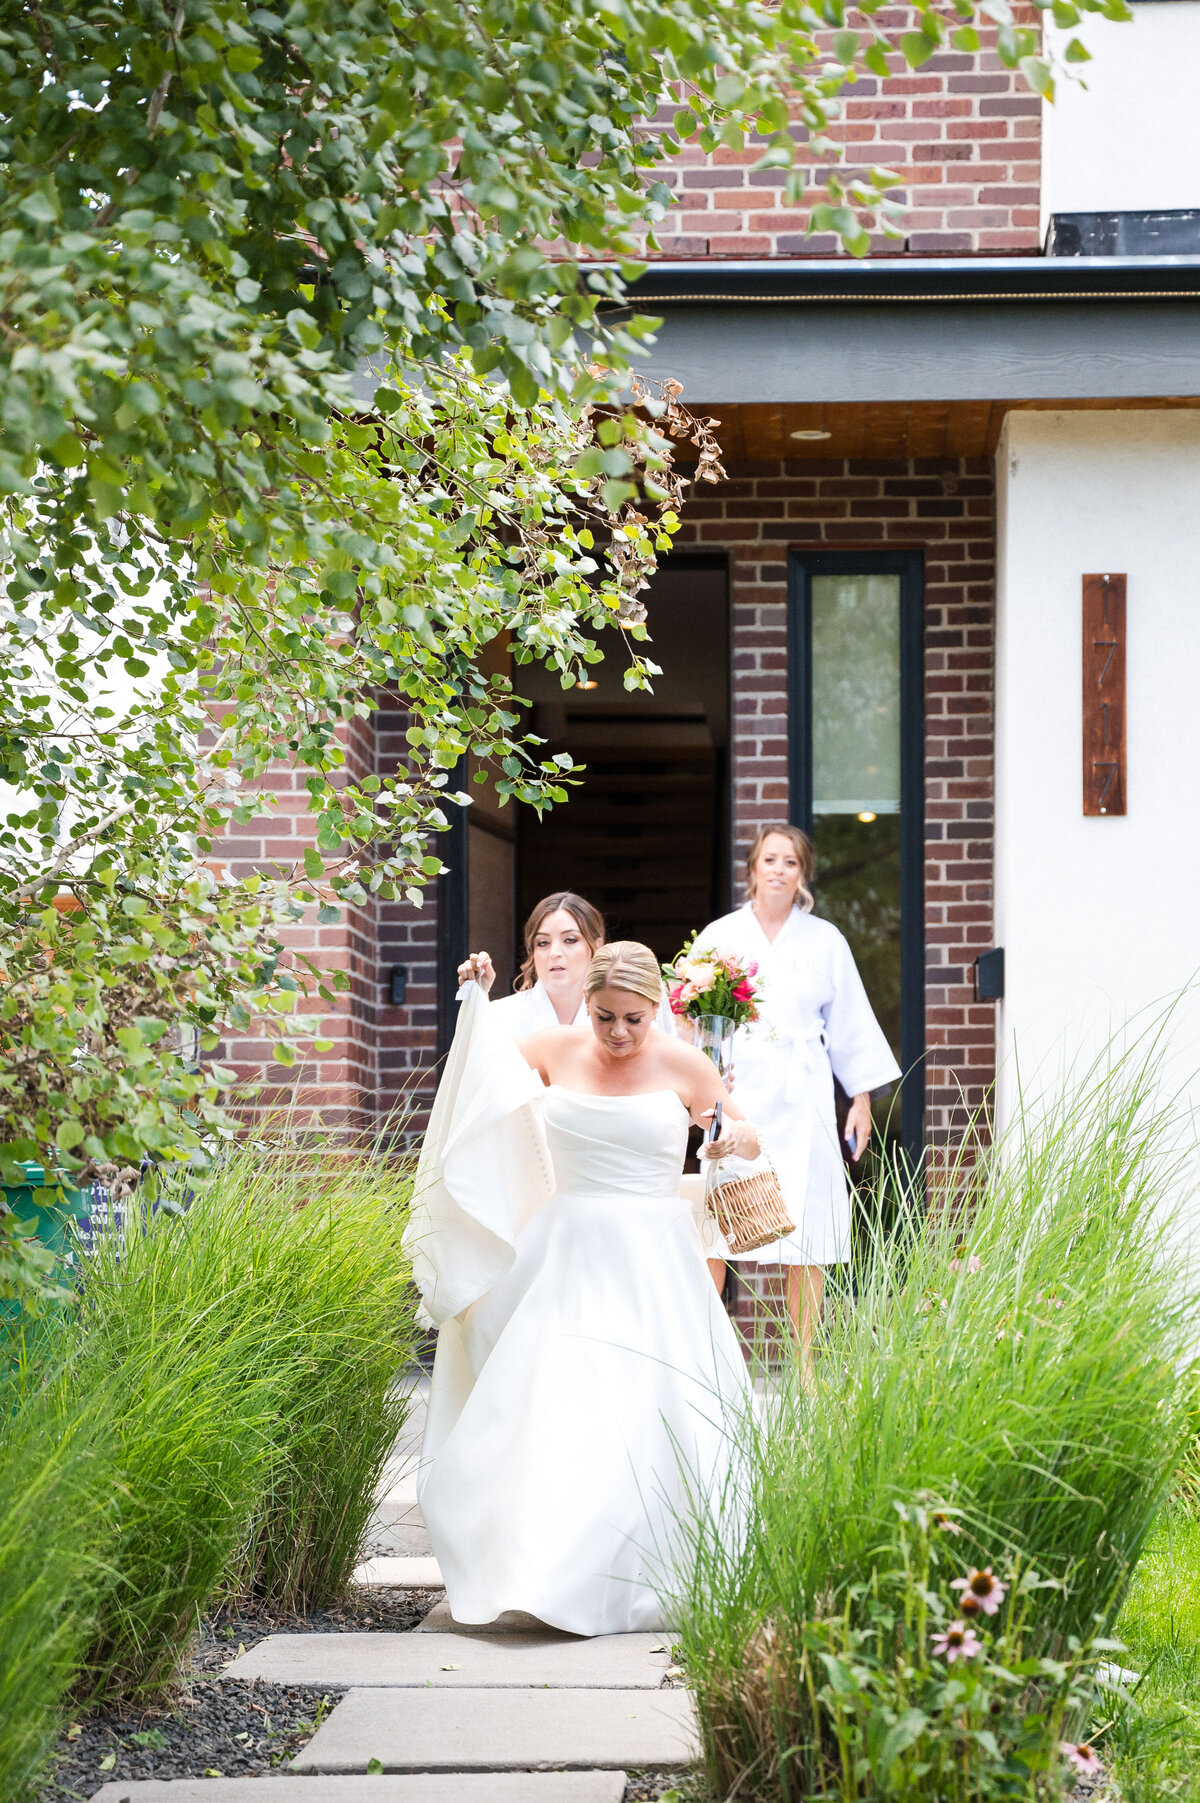 A bride exits her home in her wedding dress with two attendants helping with her dress.